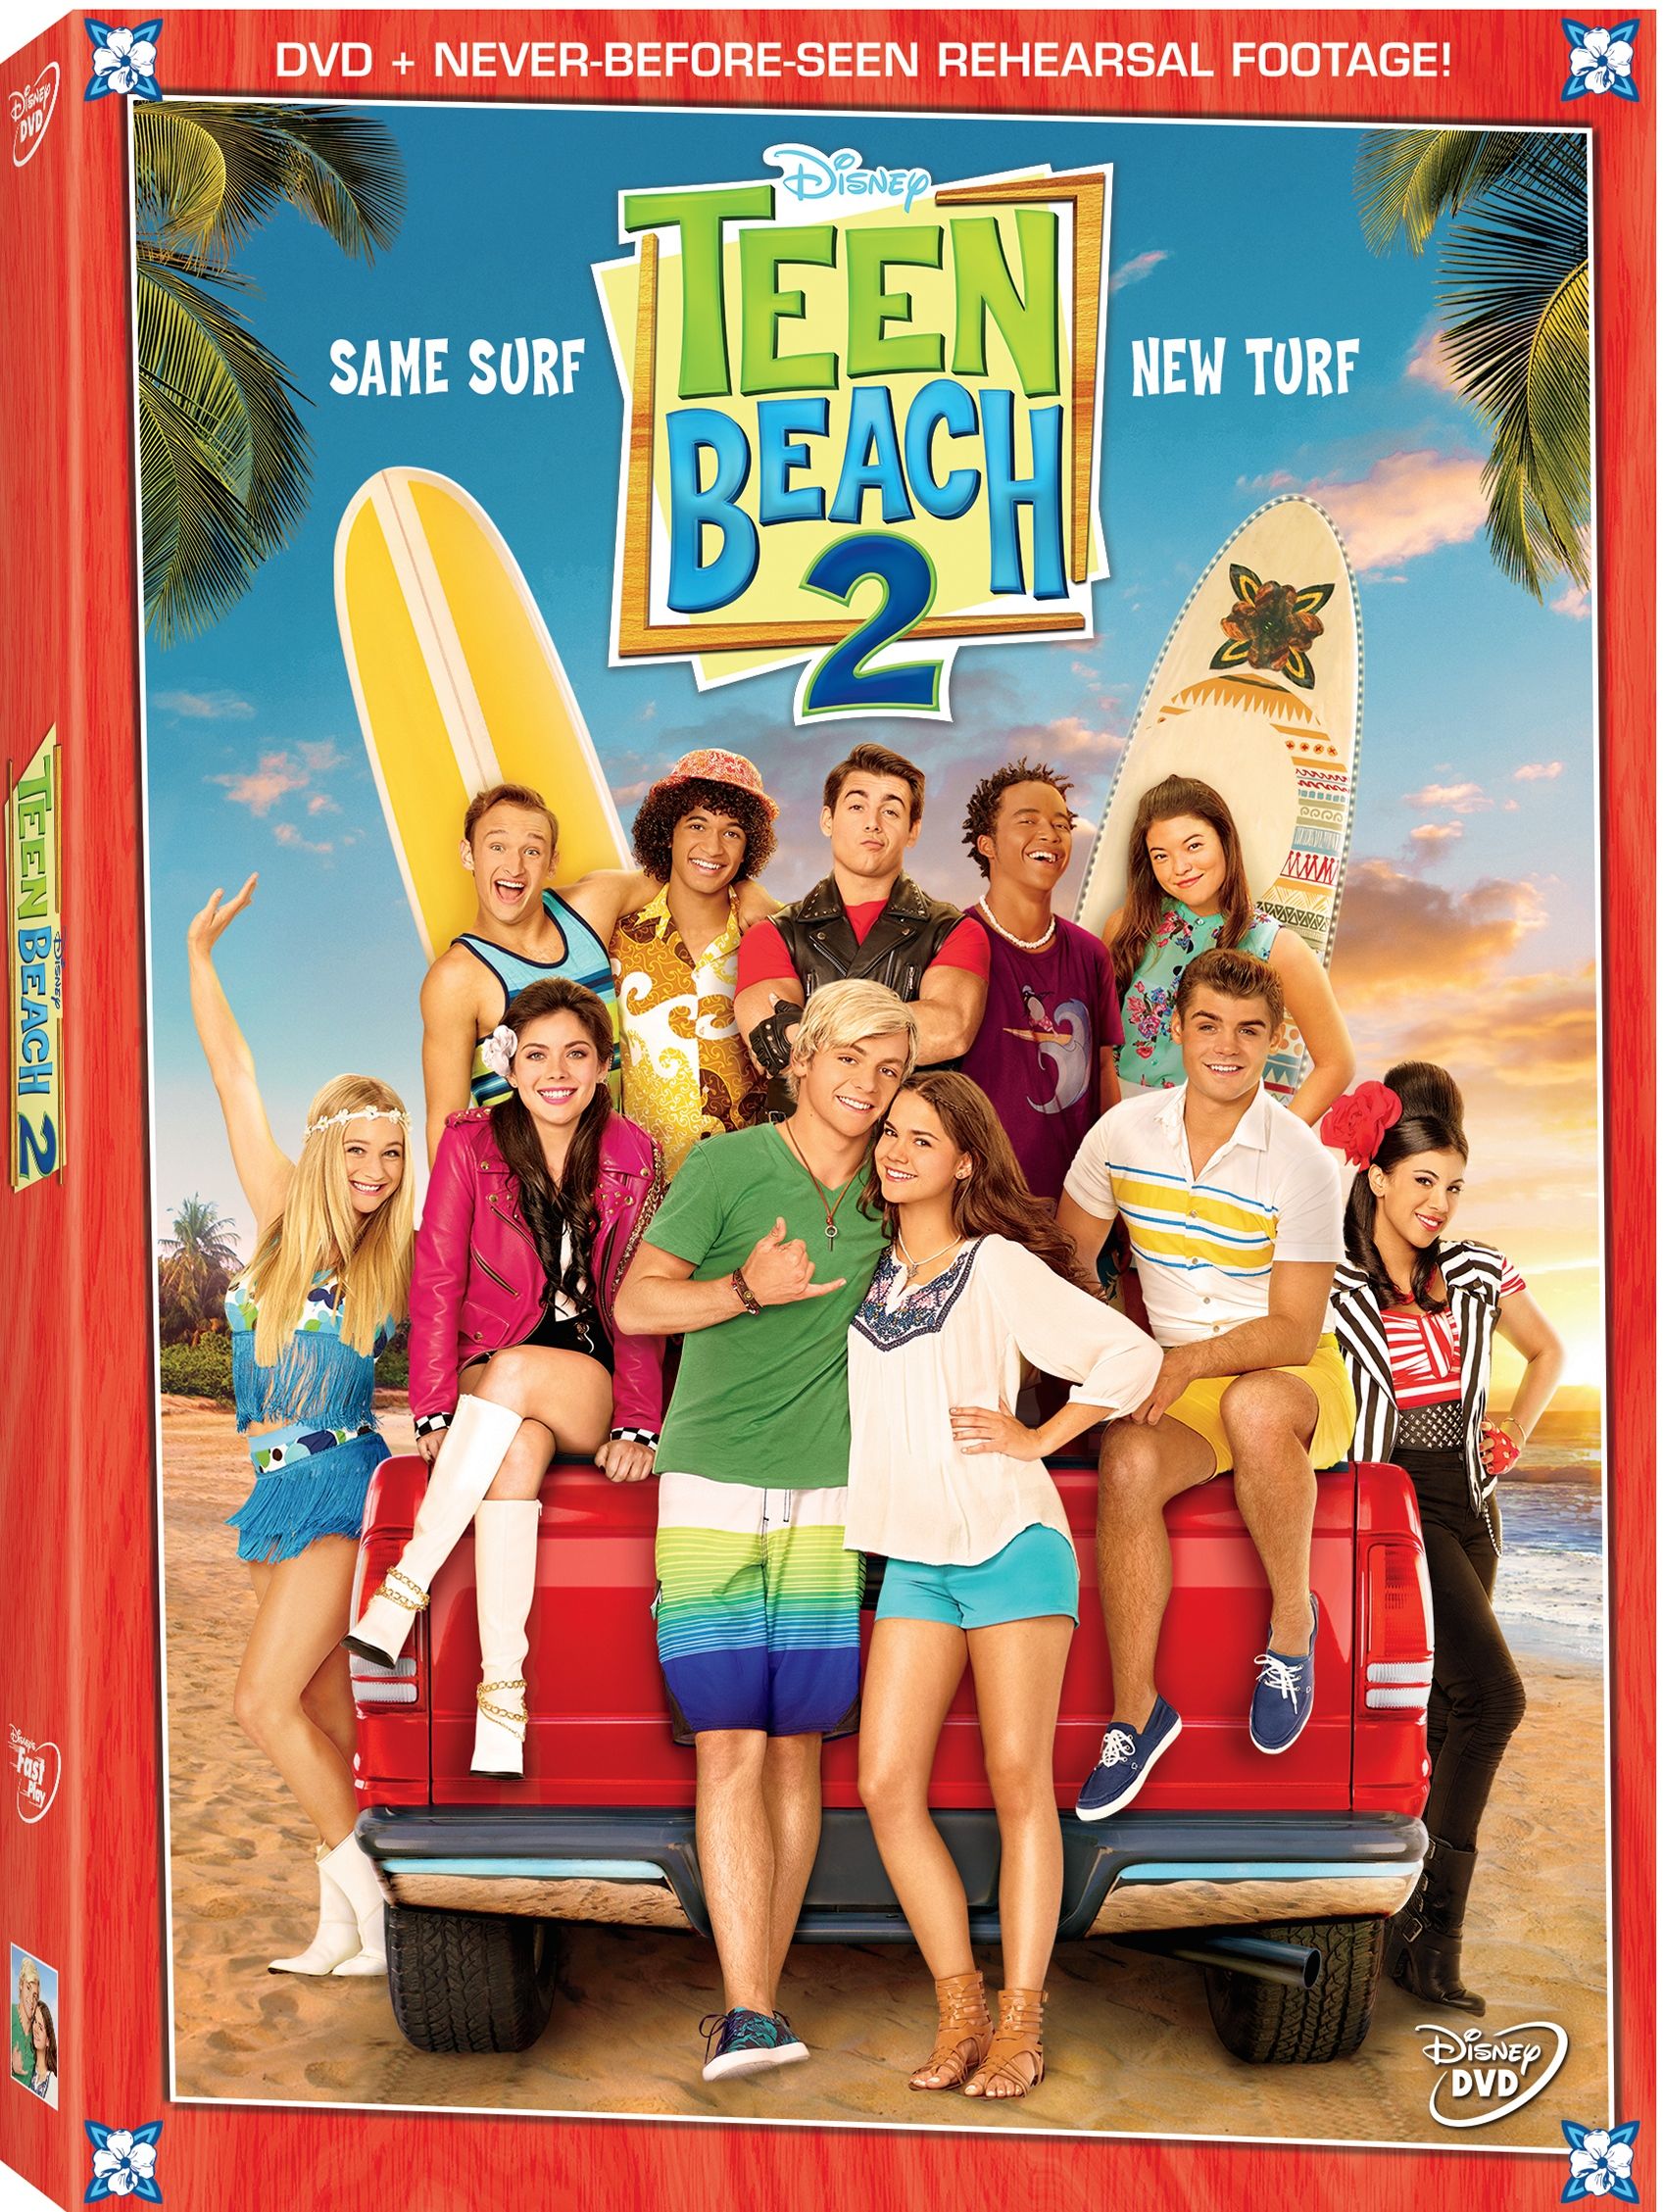 Disney Channel’s “Teen Beach 2” Out on DVD 6/26